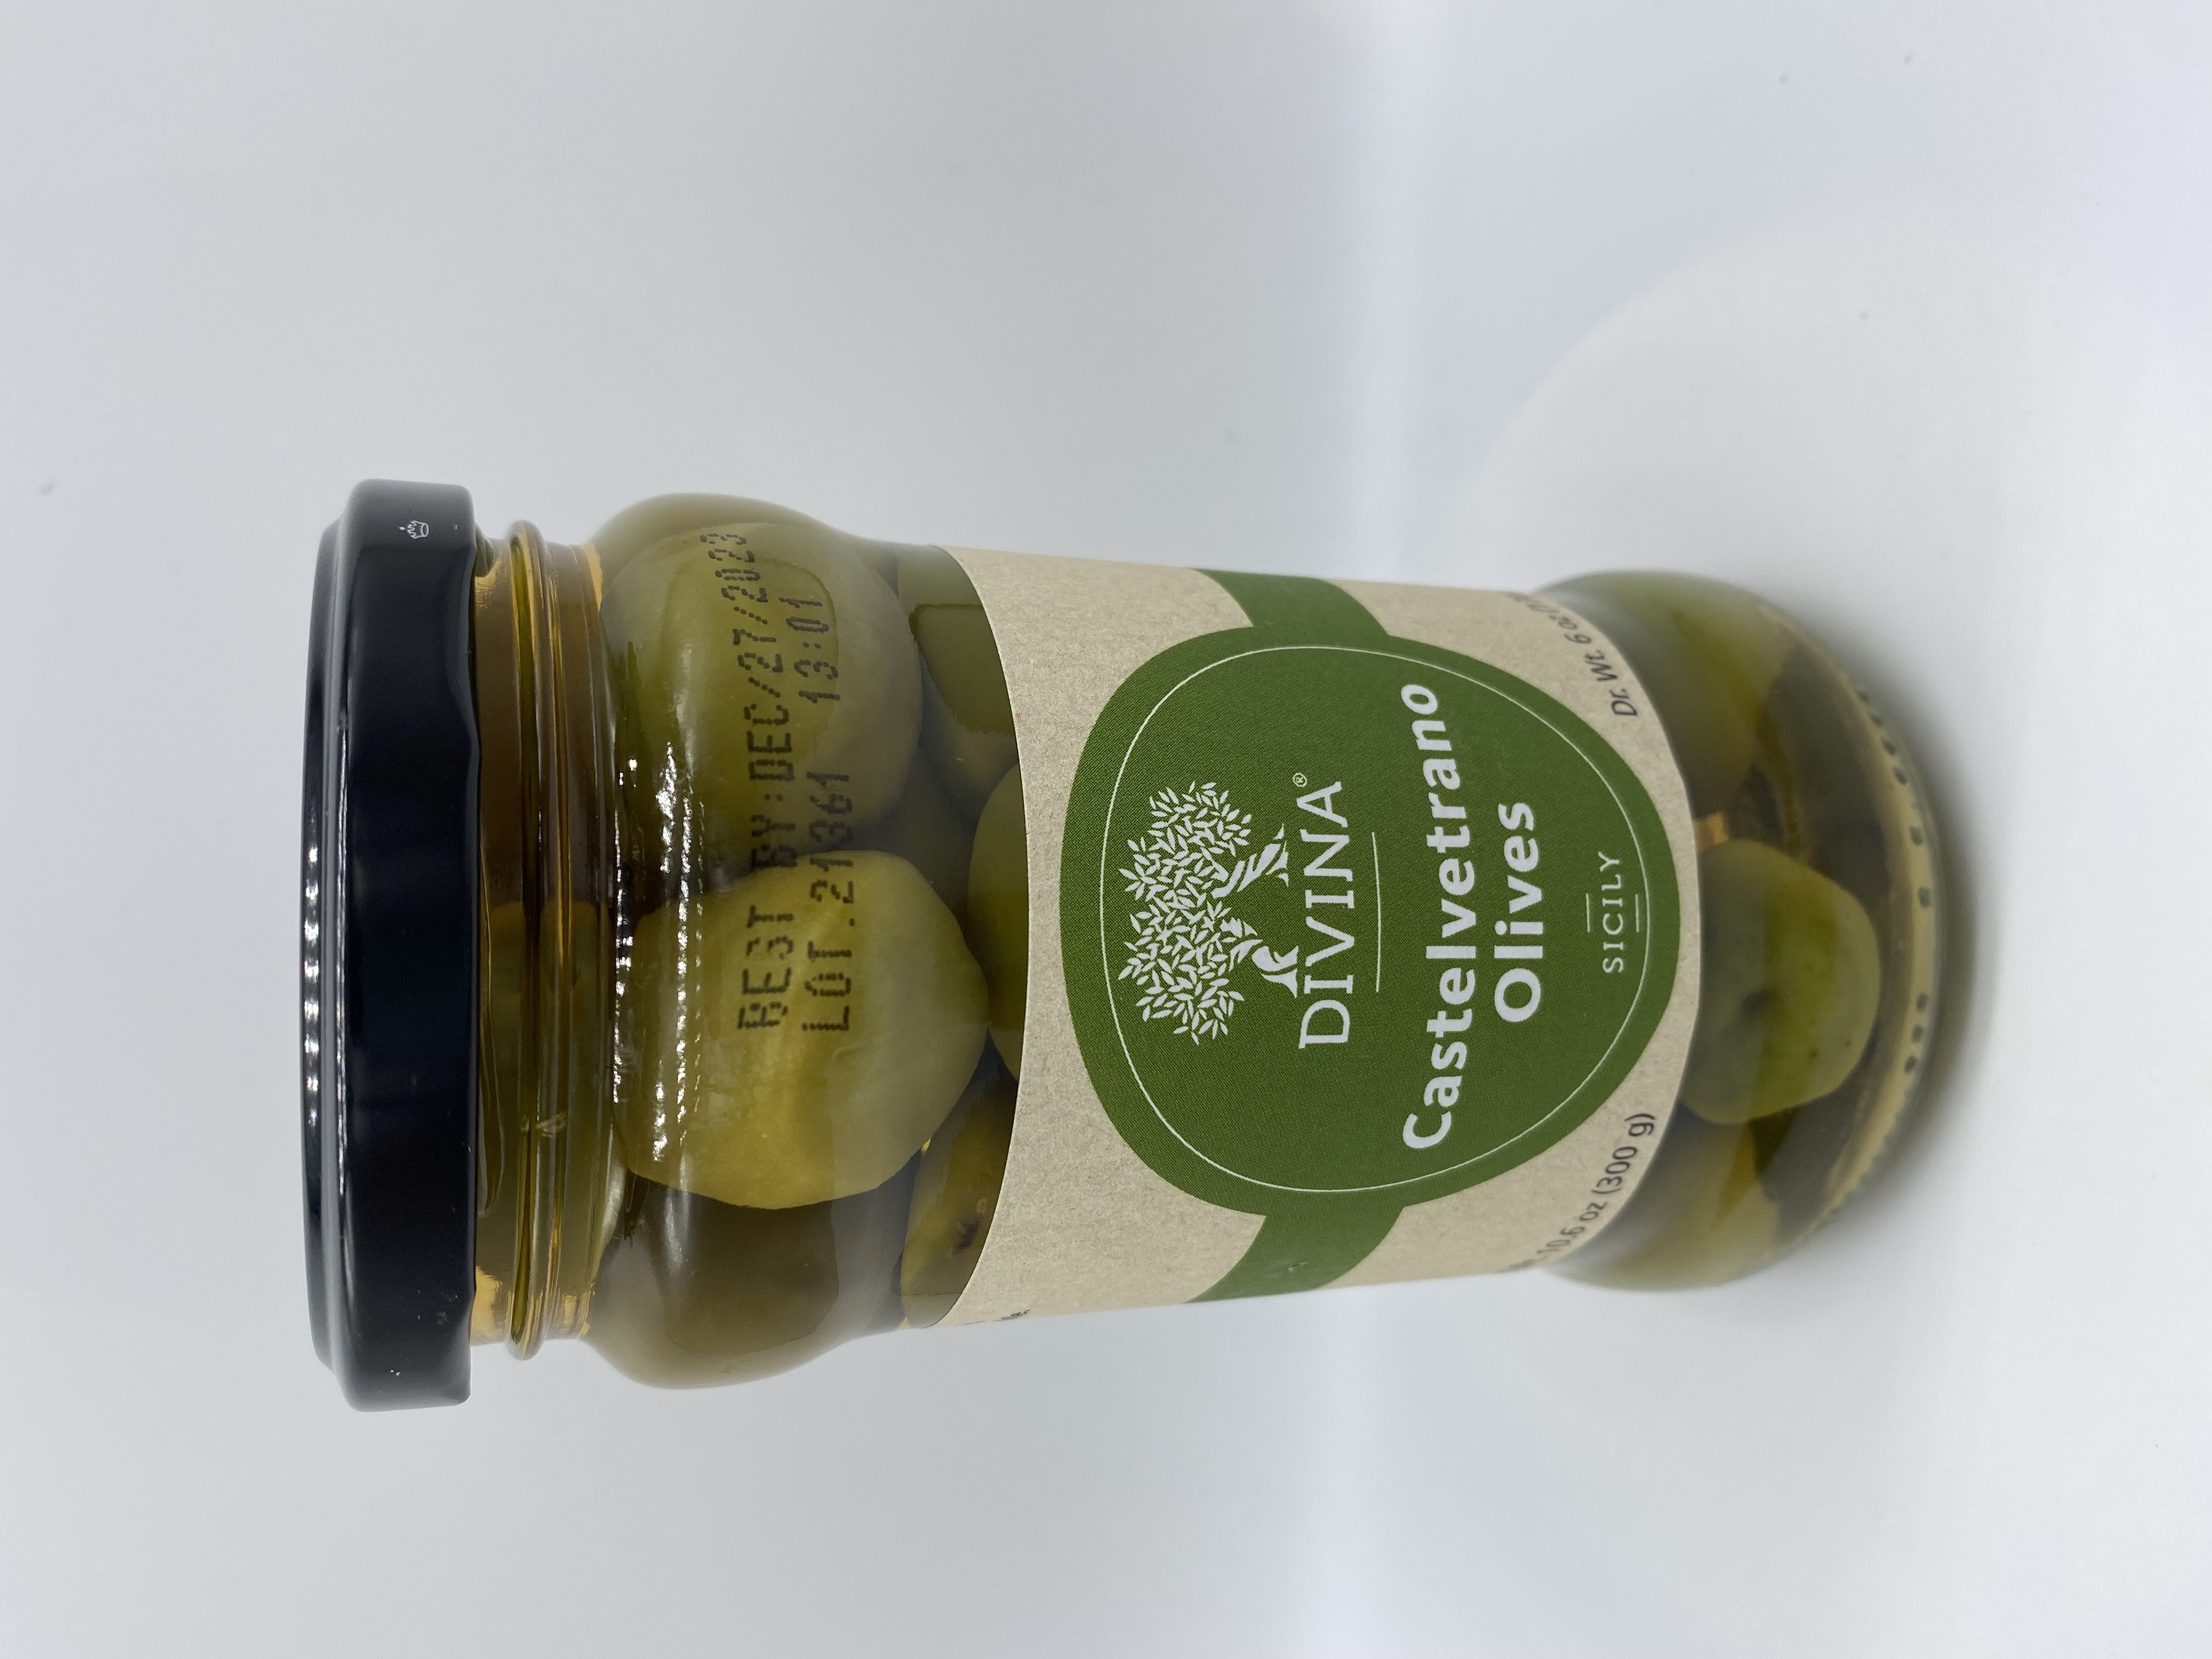 Product Image for Divina Castelvetrano Olives